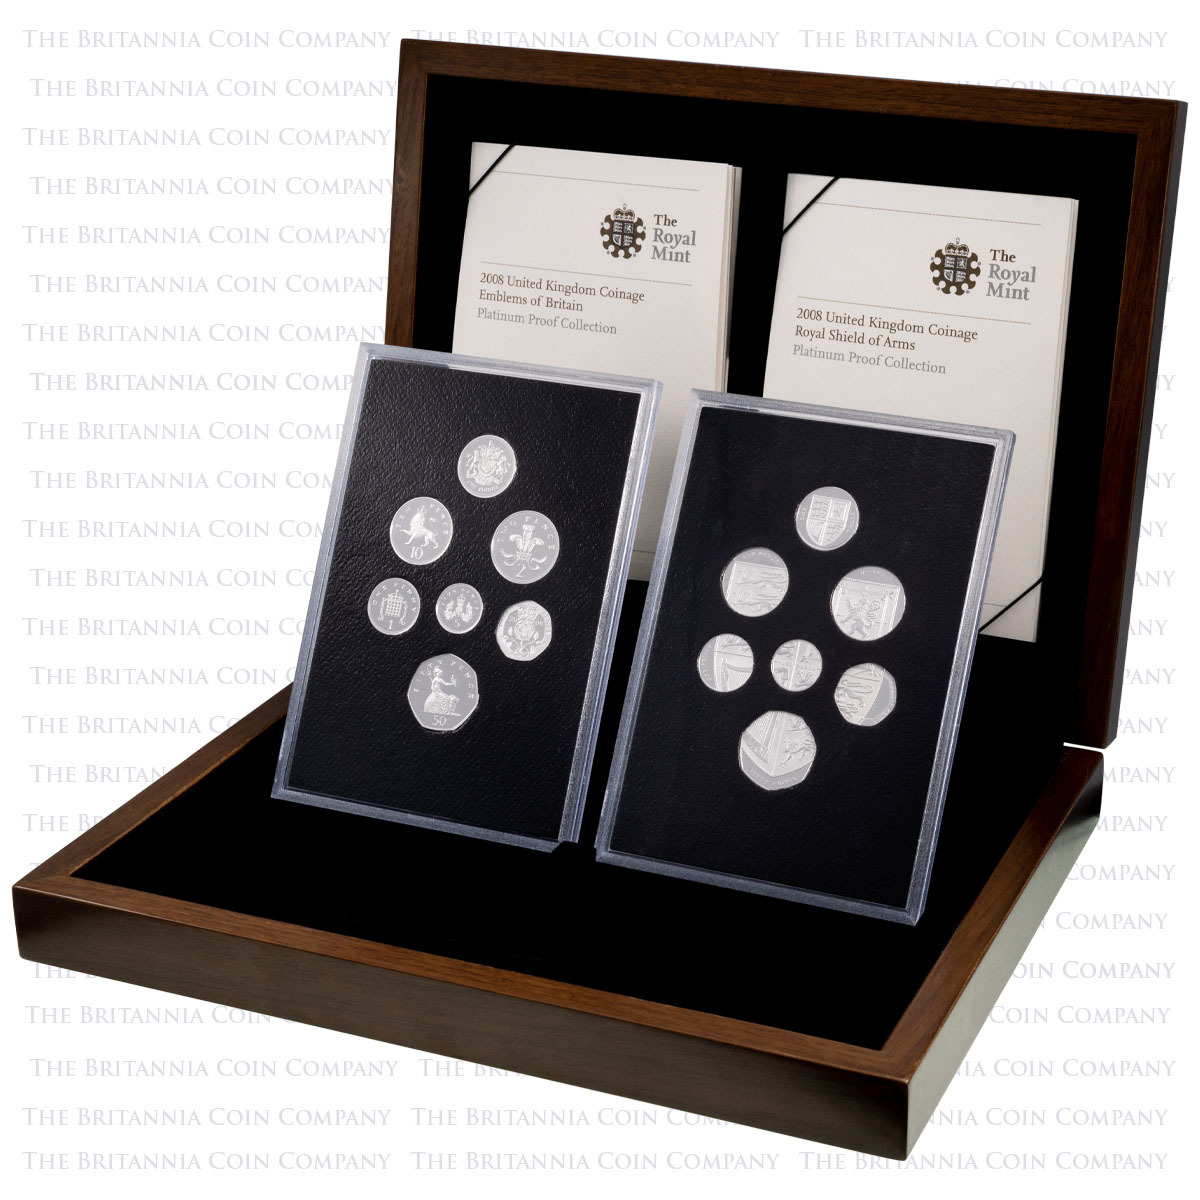 2008 Emblems Of Britain And Royal Shield Of Arms Platinum Proof 14-Coin Set